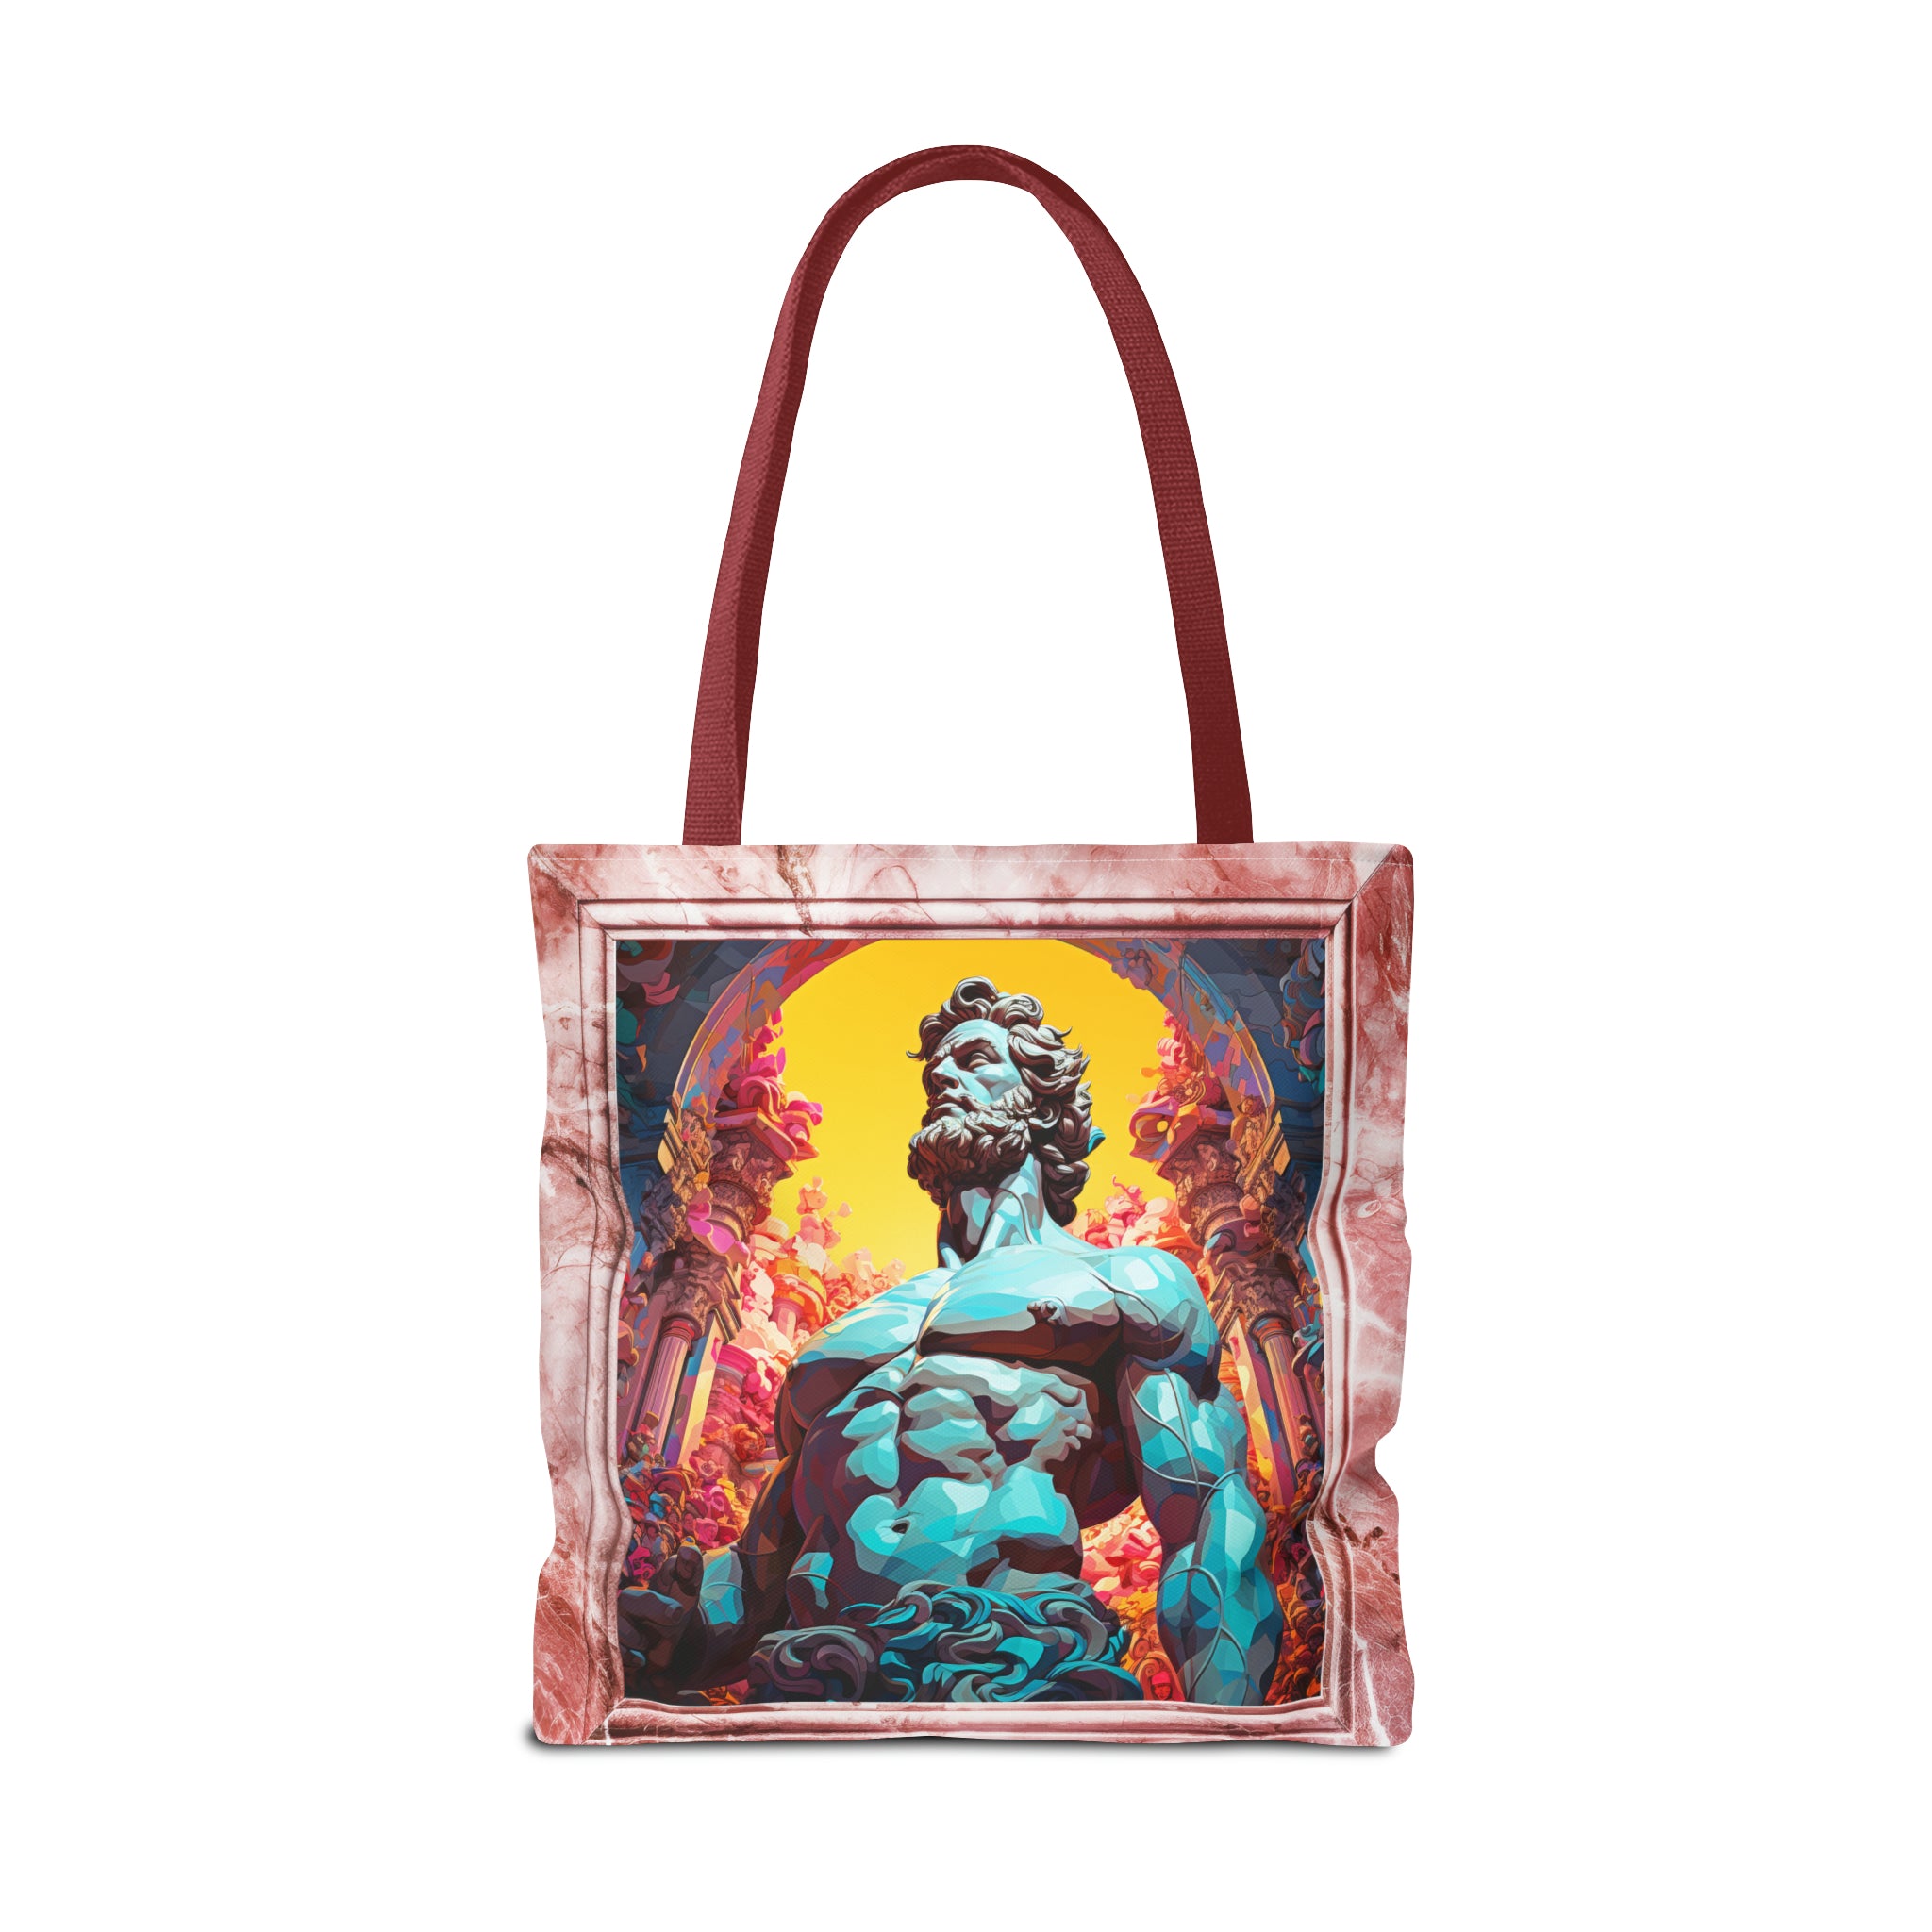 Hercules Illustration in a pink faux marble frame with red strap Tote Bag